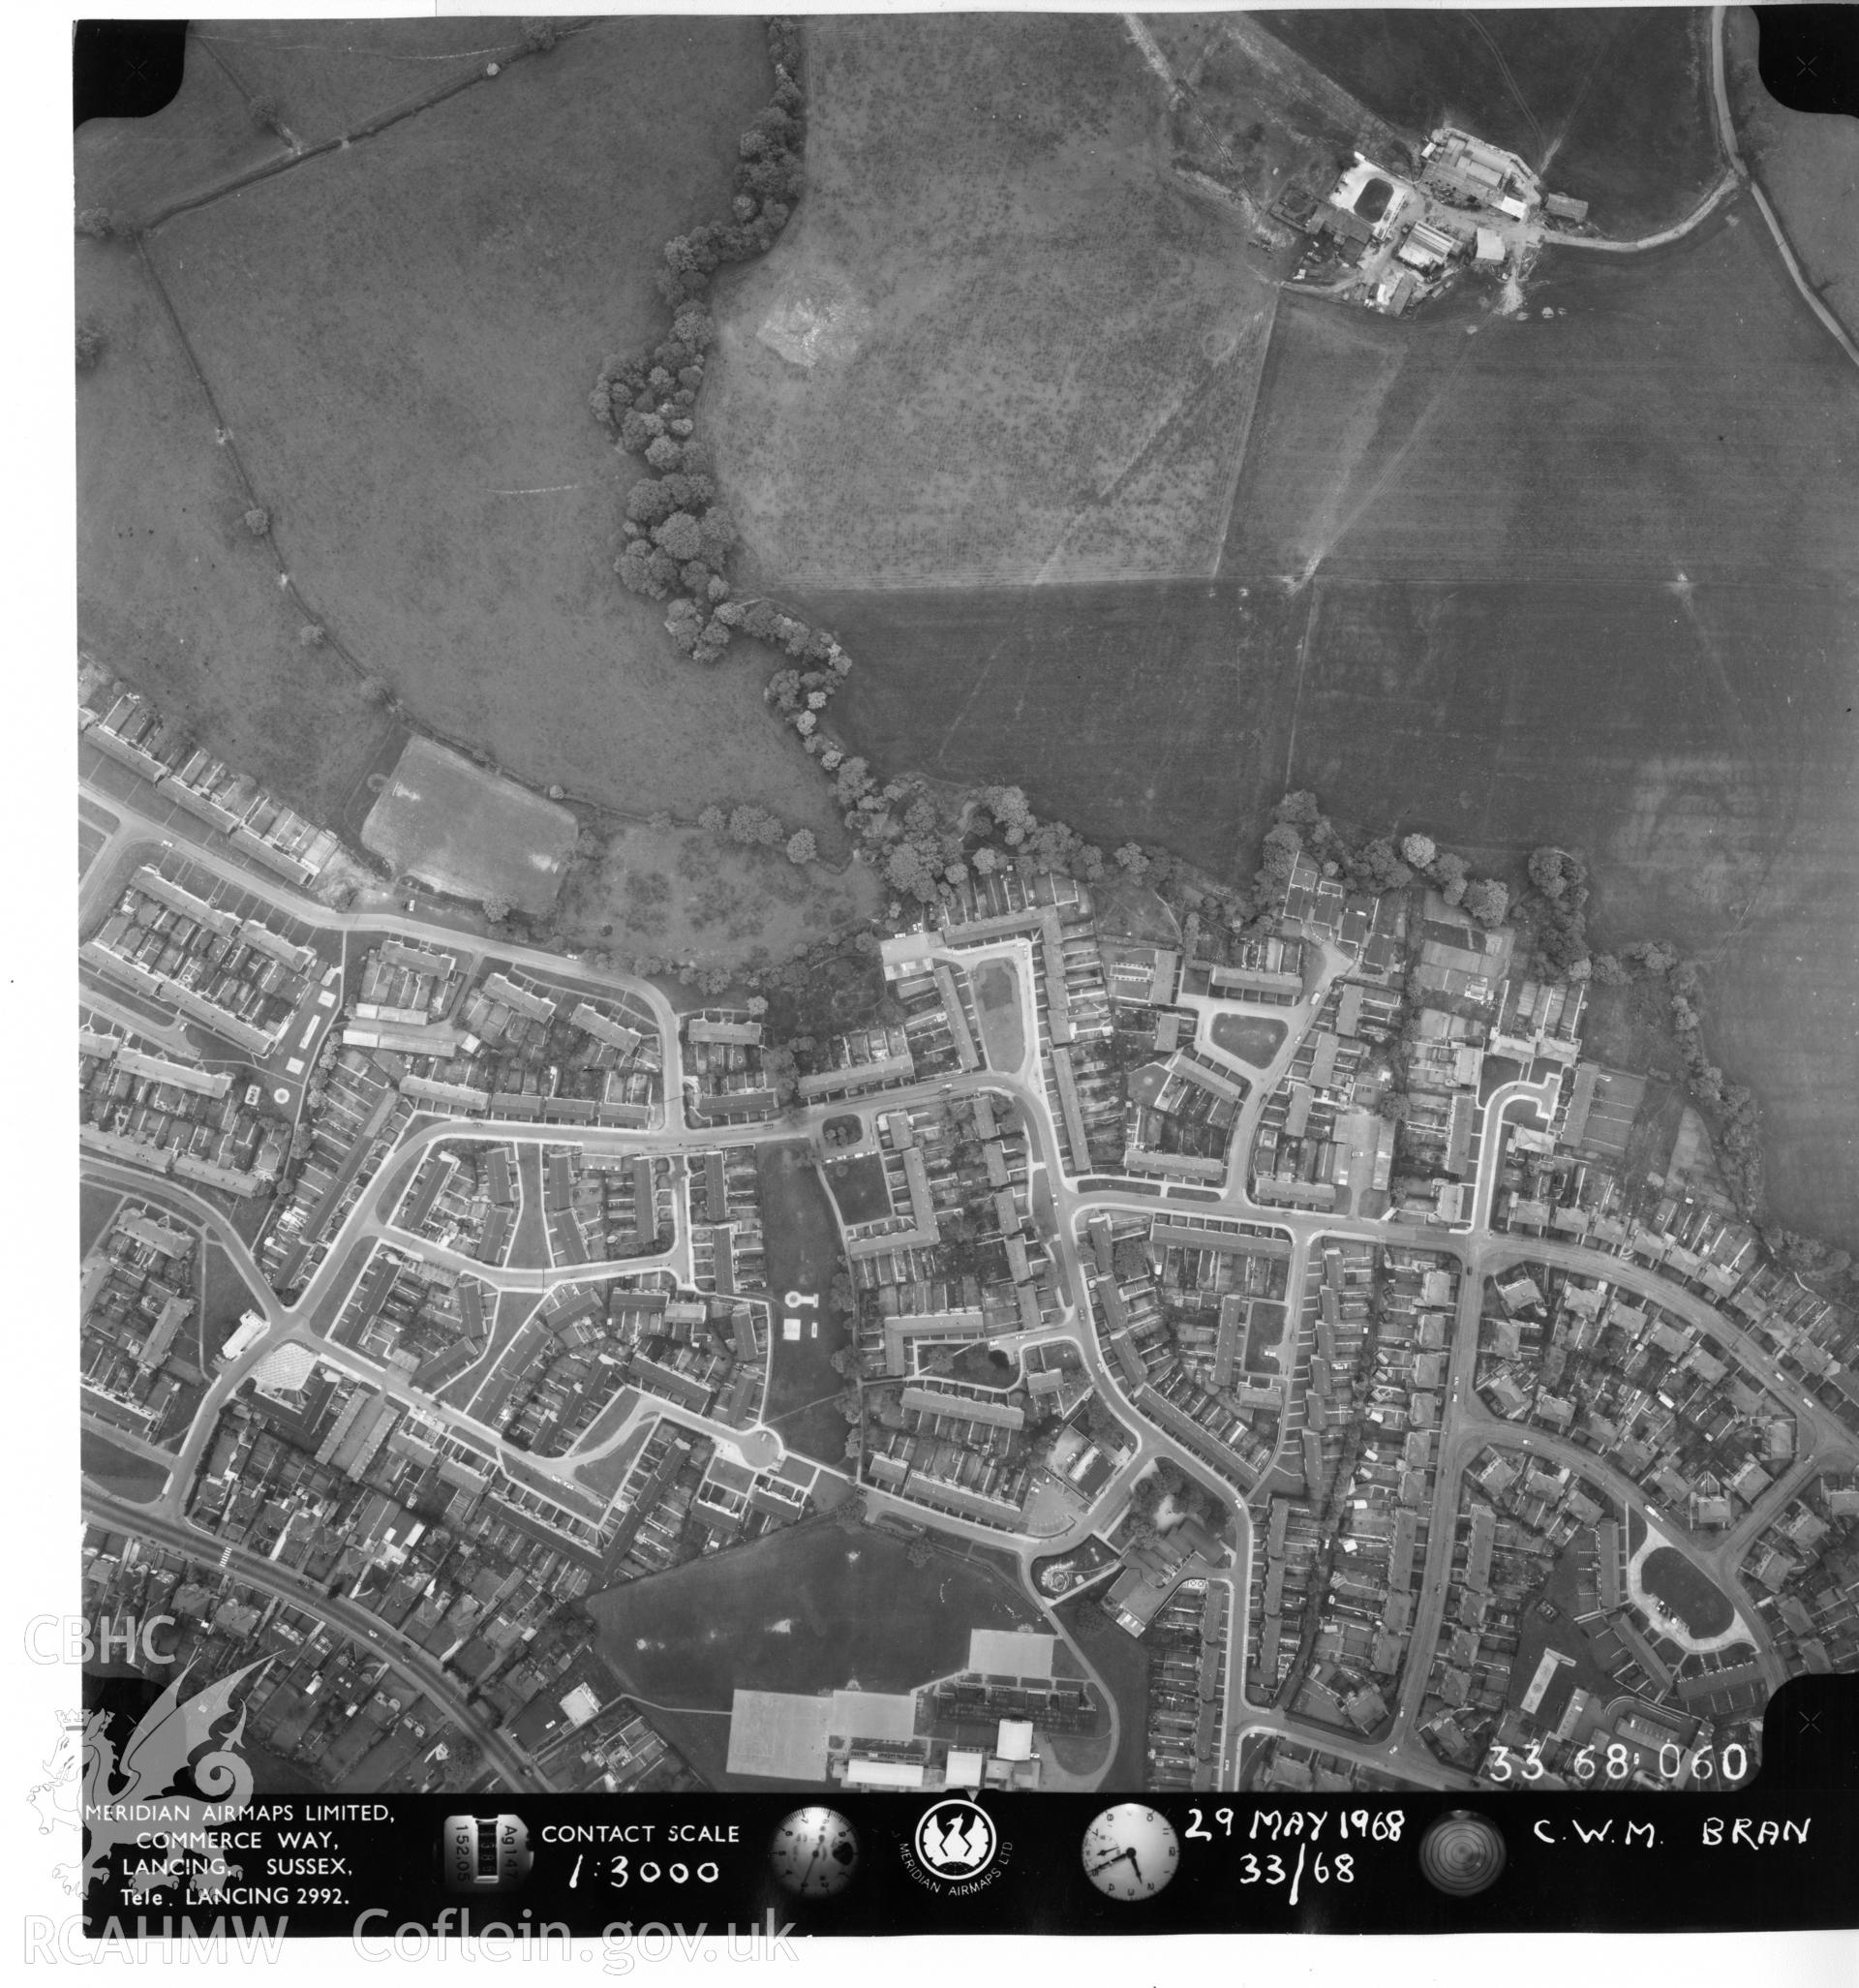 Aerial photograph of Cwmbran, taken on 29th May 1968. Included as part of Archaeology Wales' desk based assessment of former Llantarnam Community Primary School, Croeswen, Oakfield, Cwmbran, conducted in 2017.